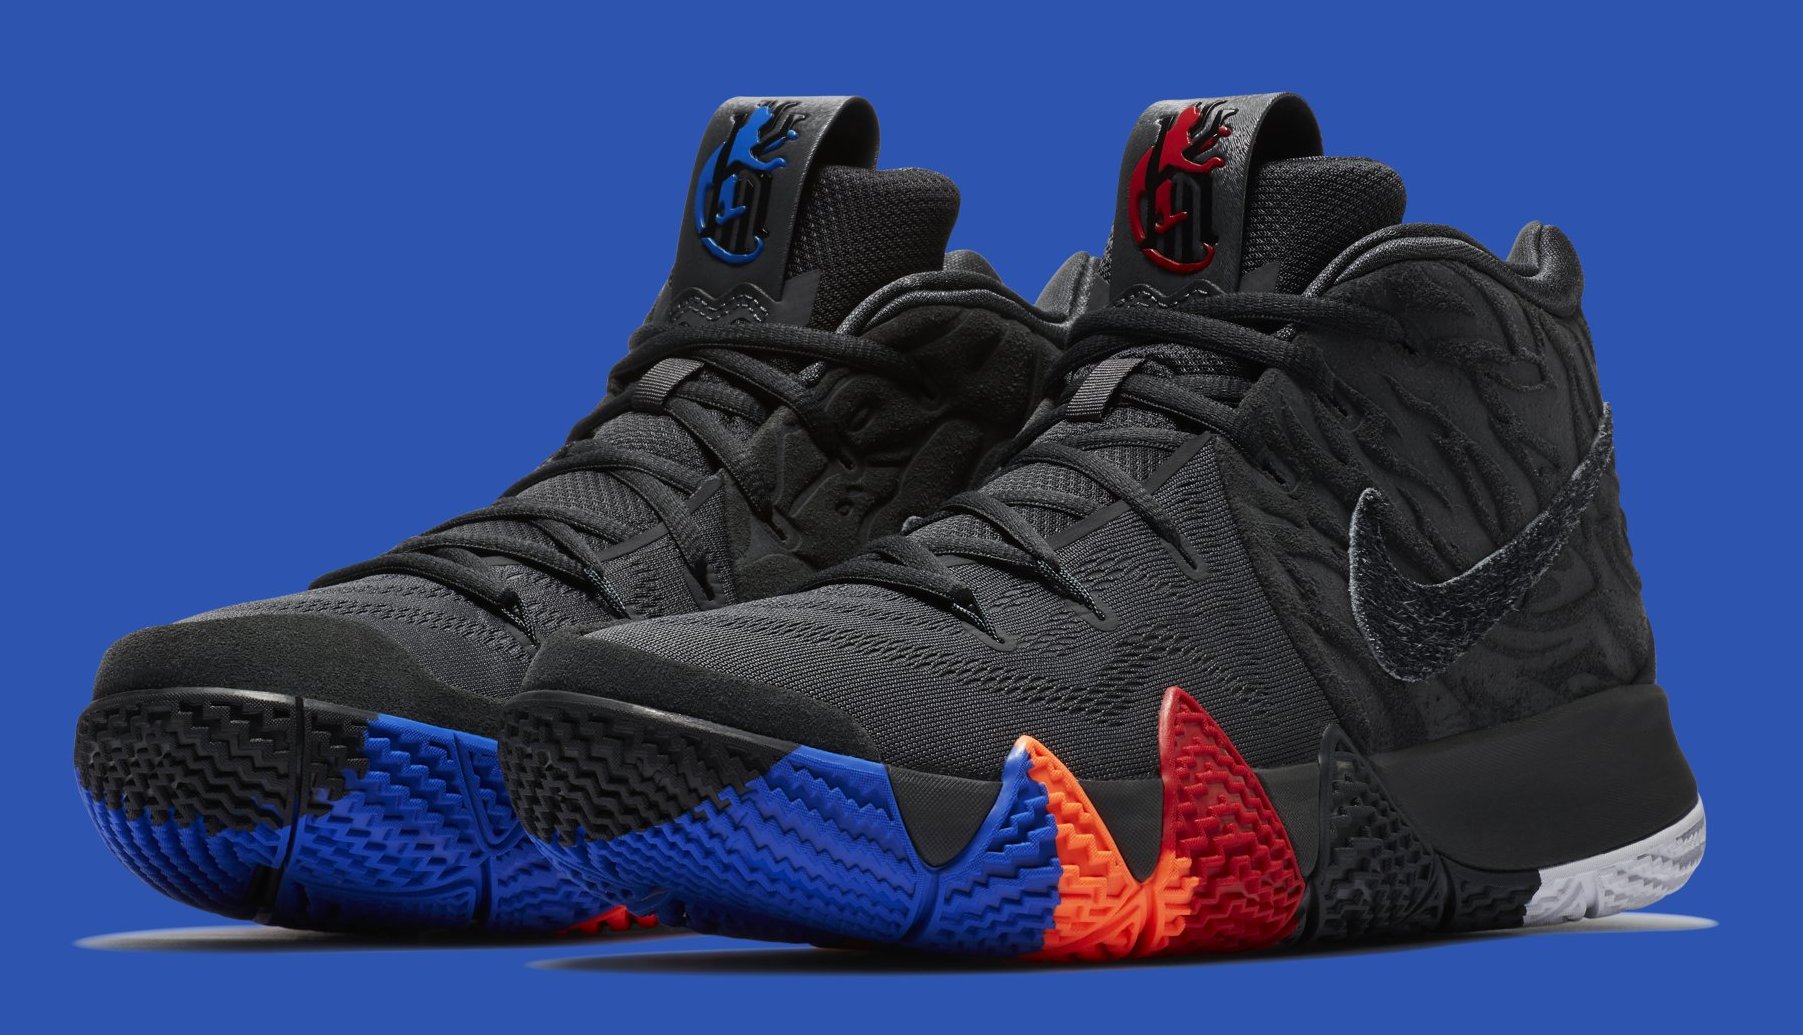 Nike Kyrie 4 'Year of the Monkey' 943807-011 Release Date | Sole Collector